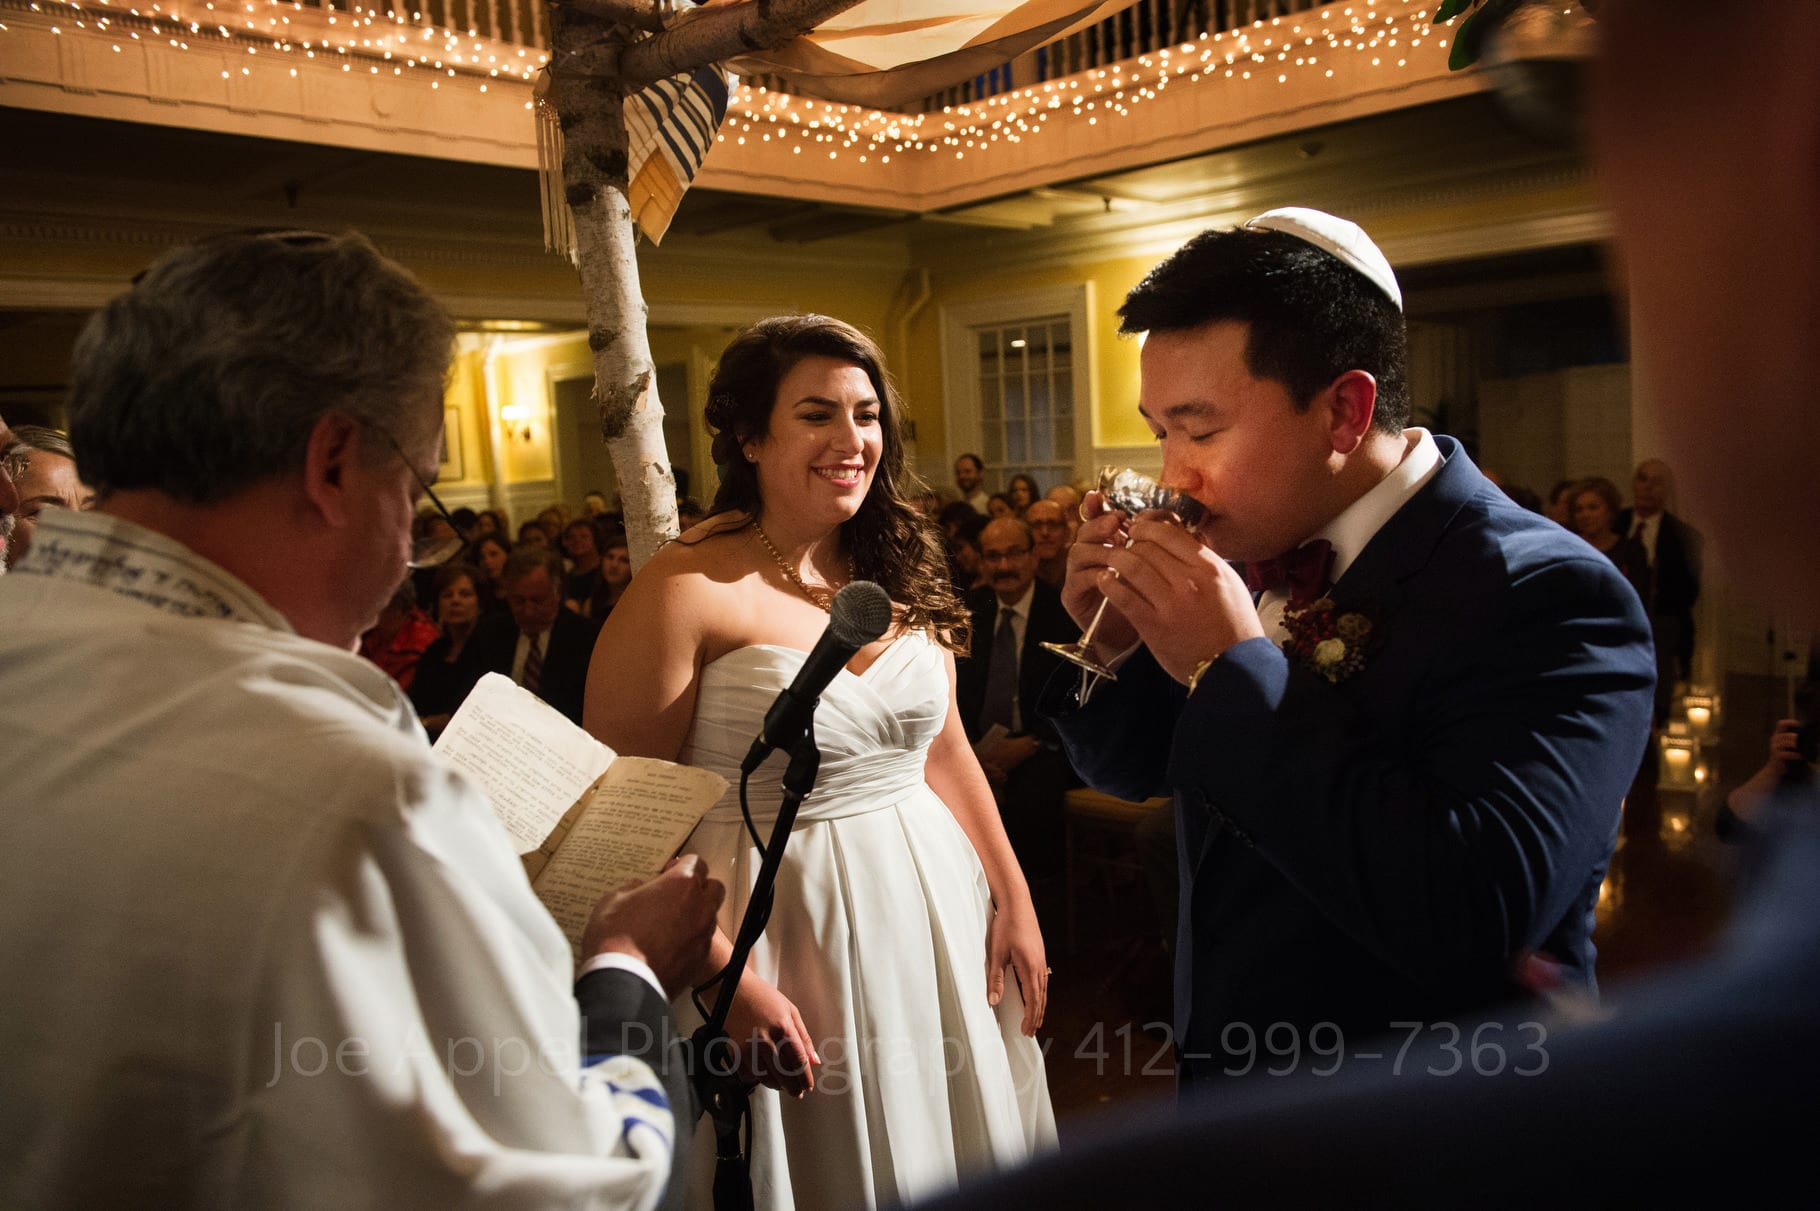 Groom drinks wine from a kiddush cup while his bride looks on smiling